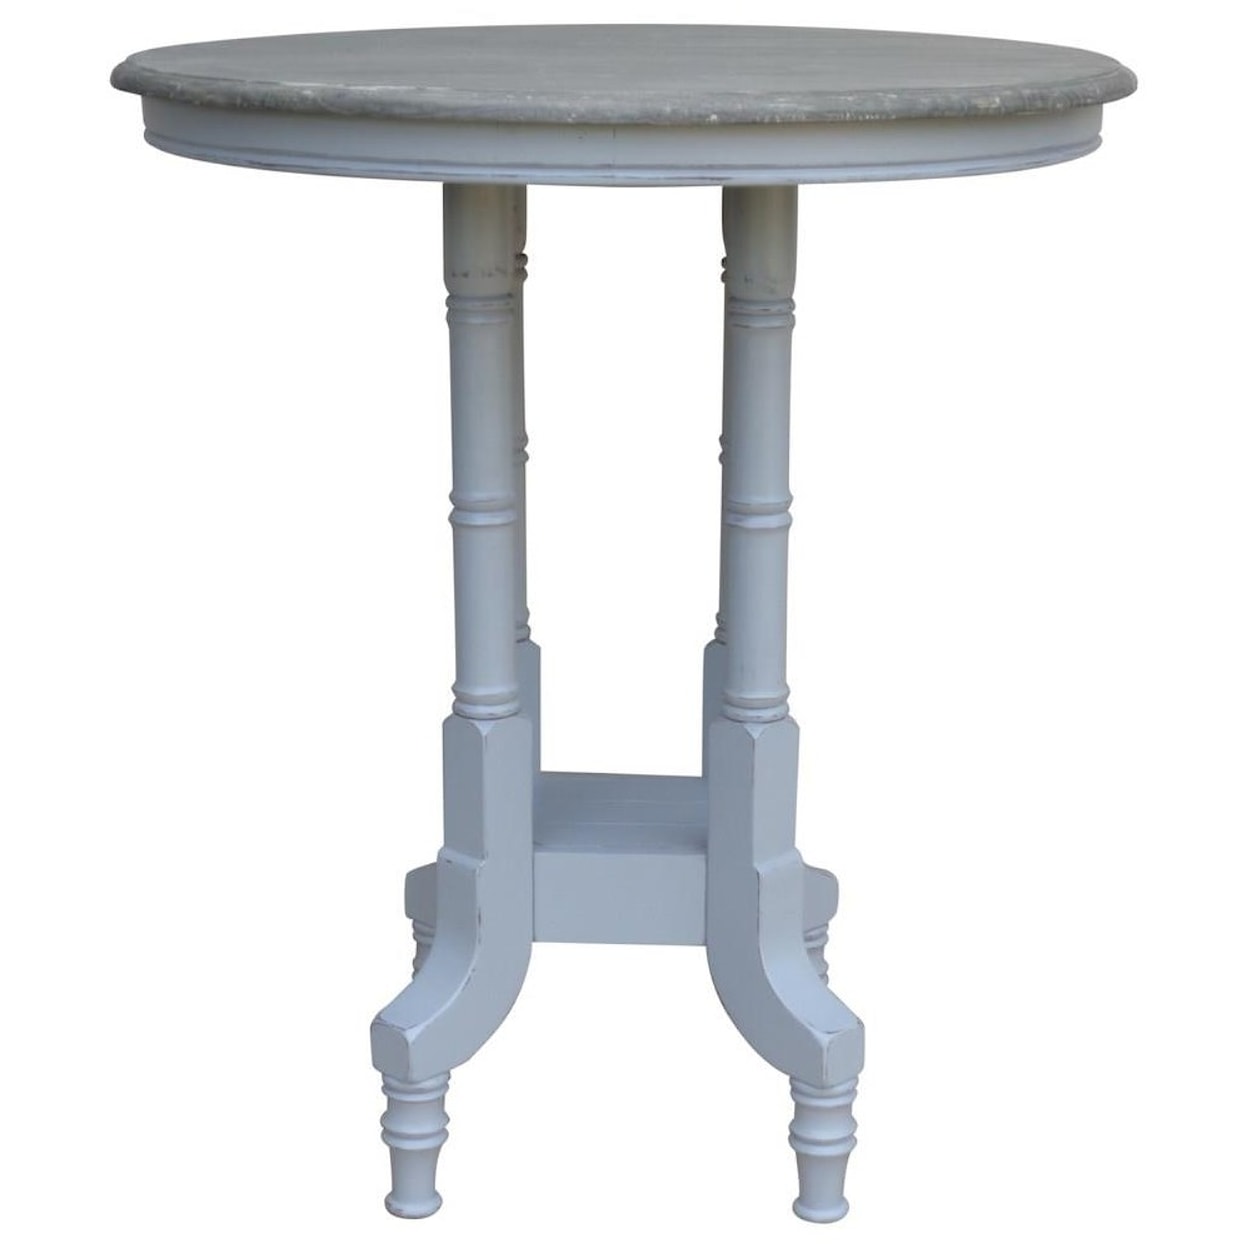 Trade Winds Furniture Casual Dining Island Gathering Pub Table